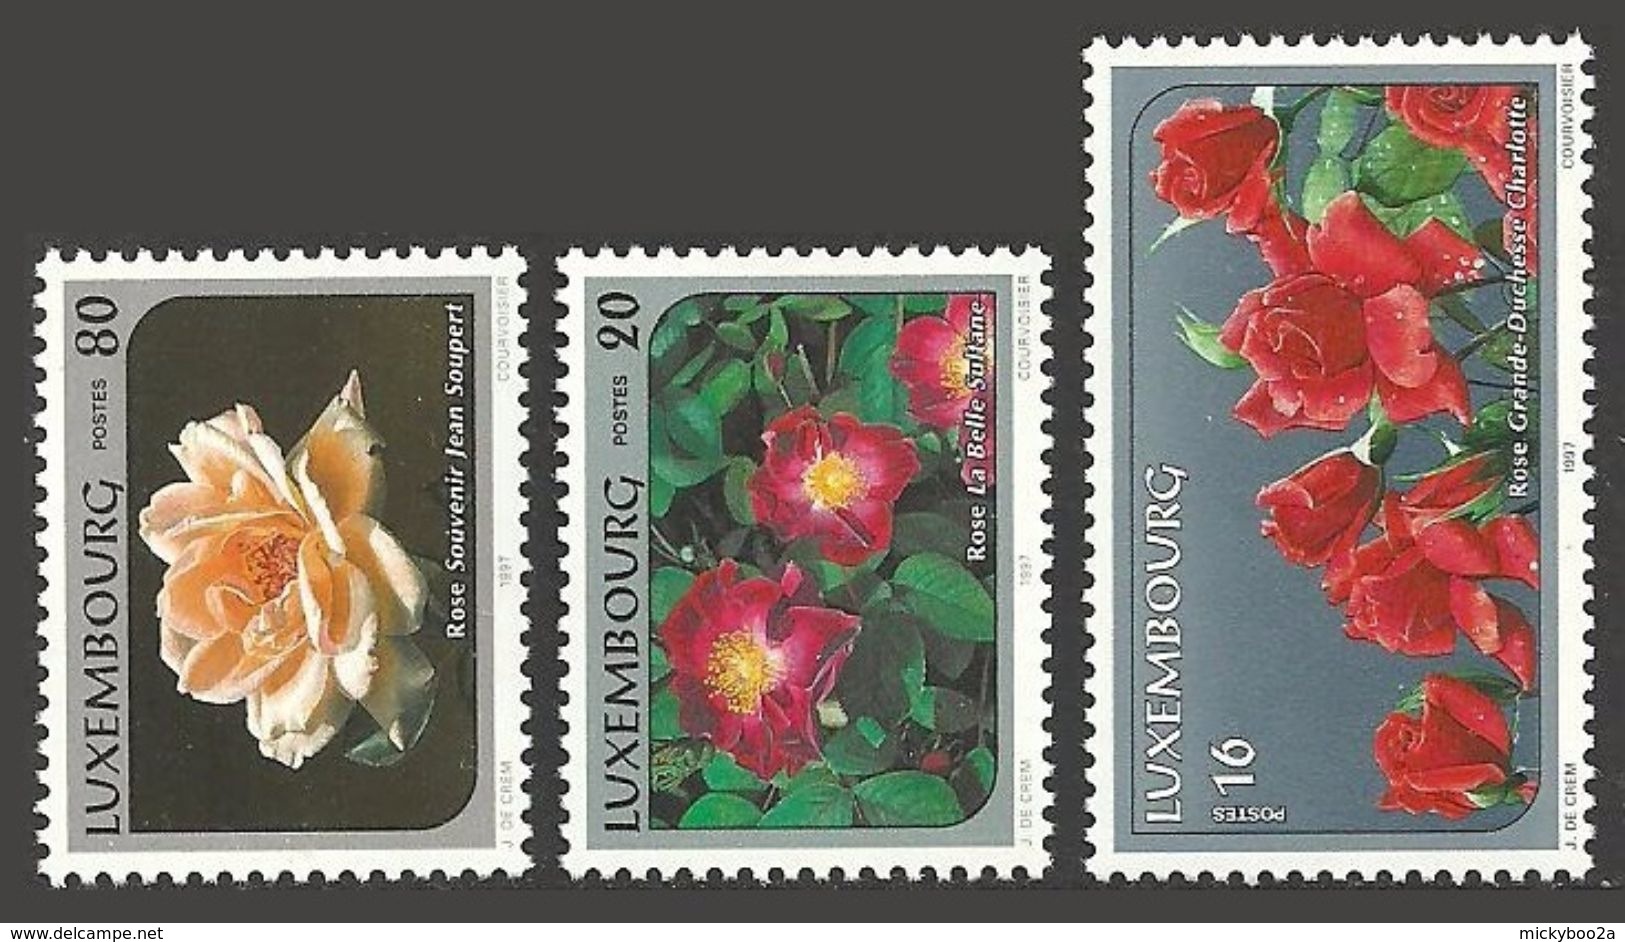 LUXEMBOURG 1997 FLOWERS ROSES FEDERATION OF ROSE SOCIETIES SET MNH - Nuevos